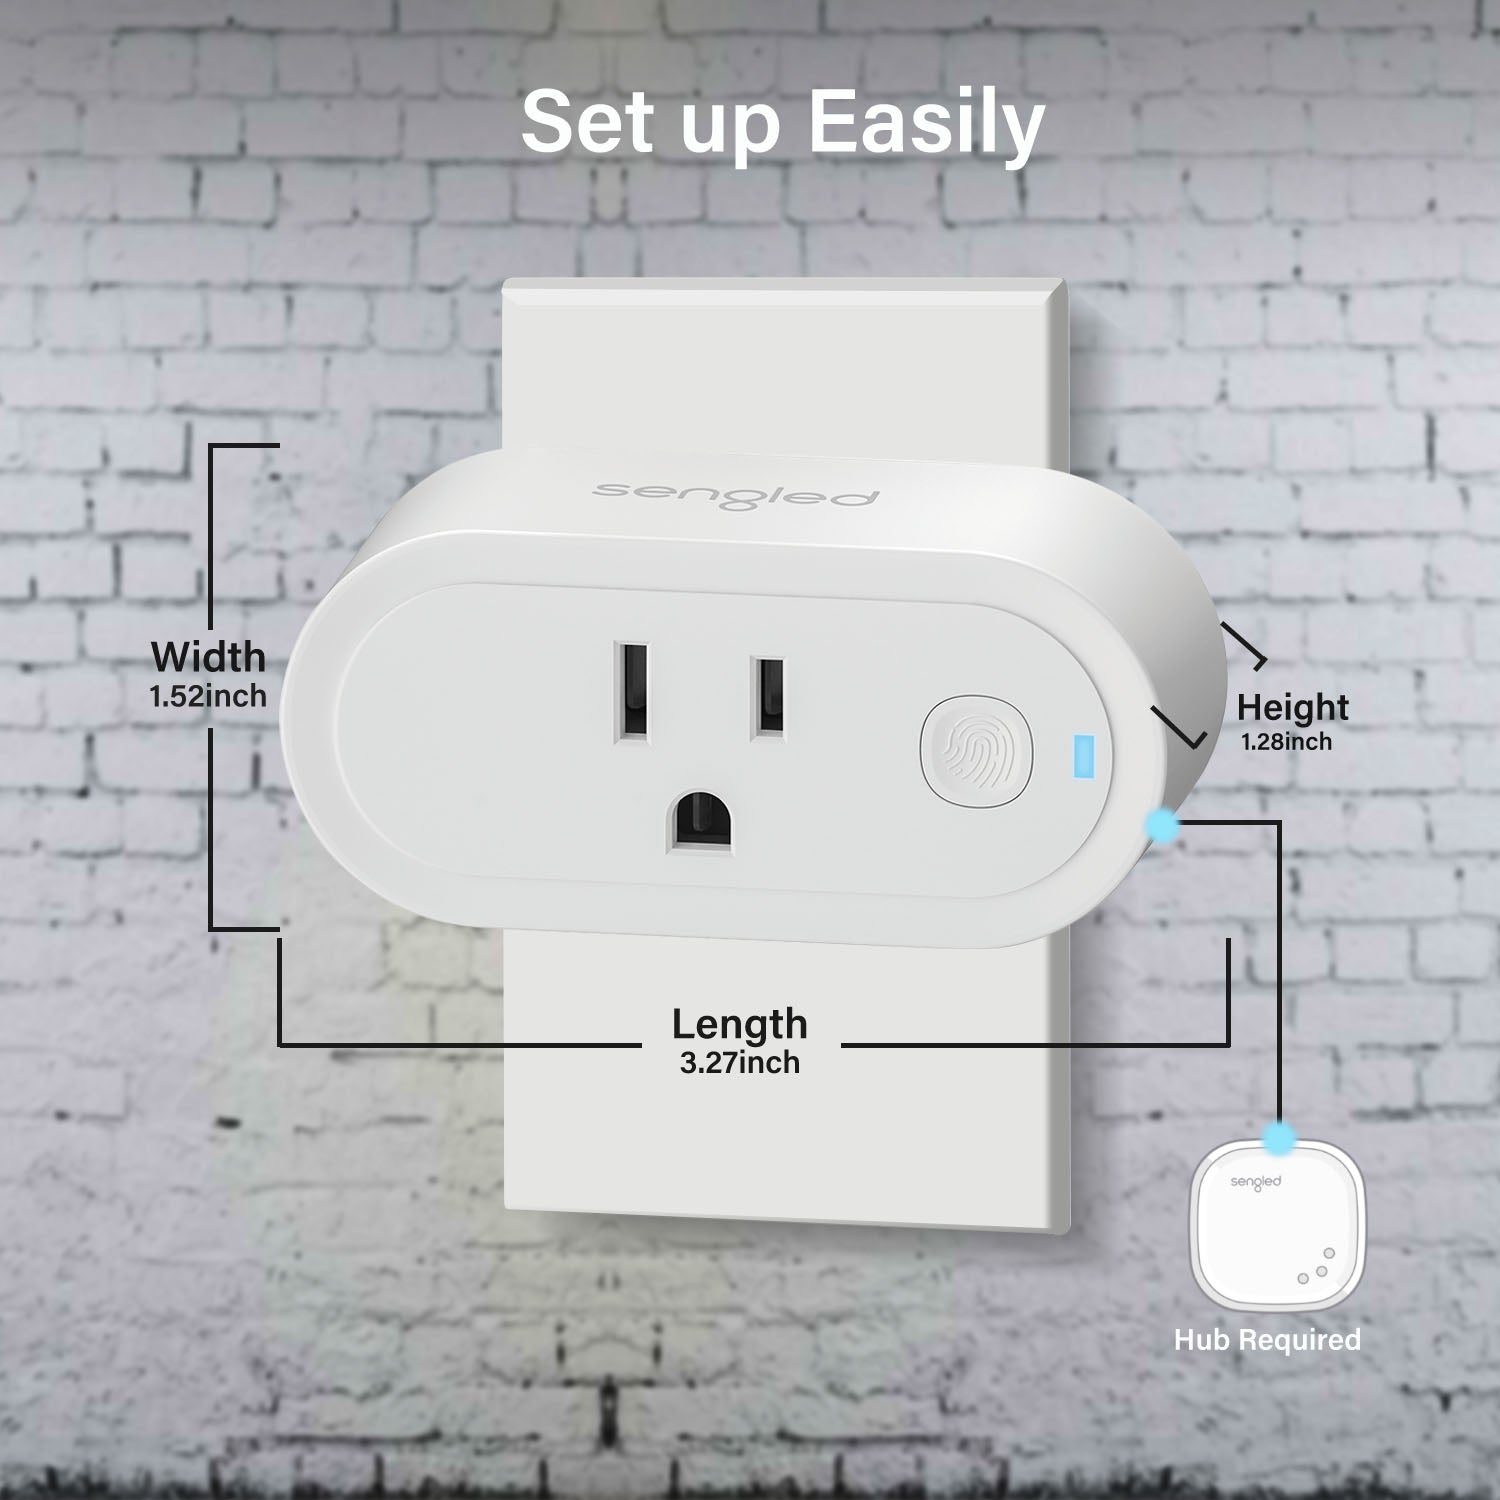 Sengled Smart Plugs, Hub Required, Works with SmartThings and  Echo  with Built-in Hub, Voice Control with Alexa and Google Home, 15Amp Smart